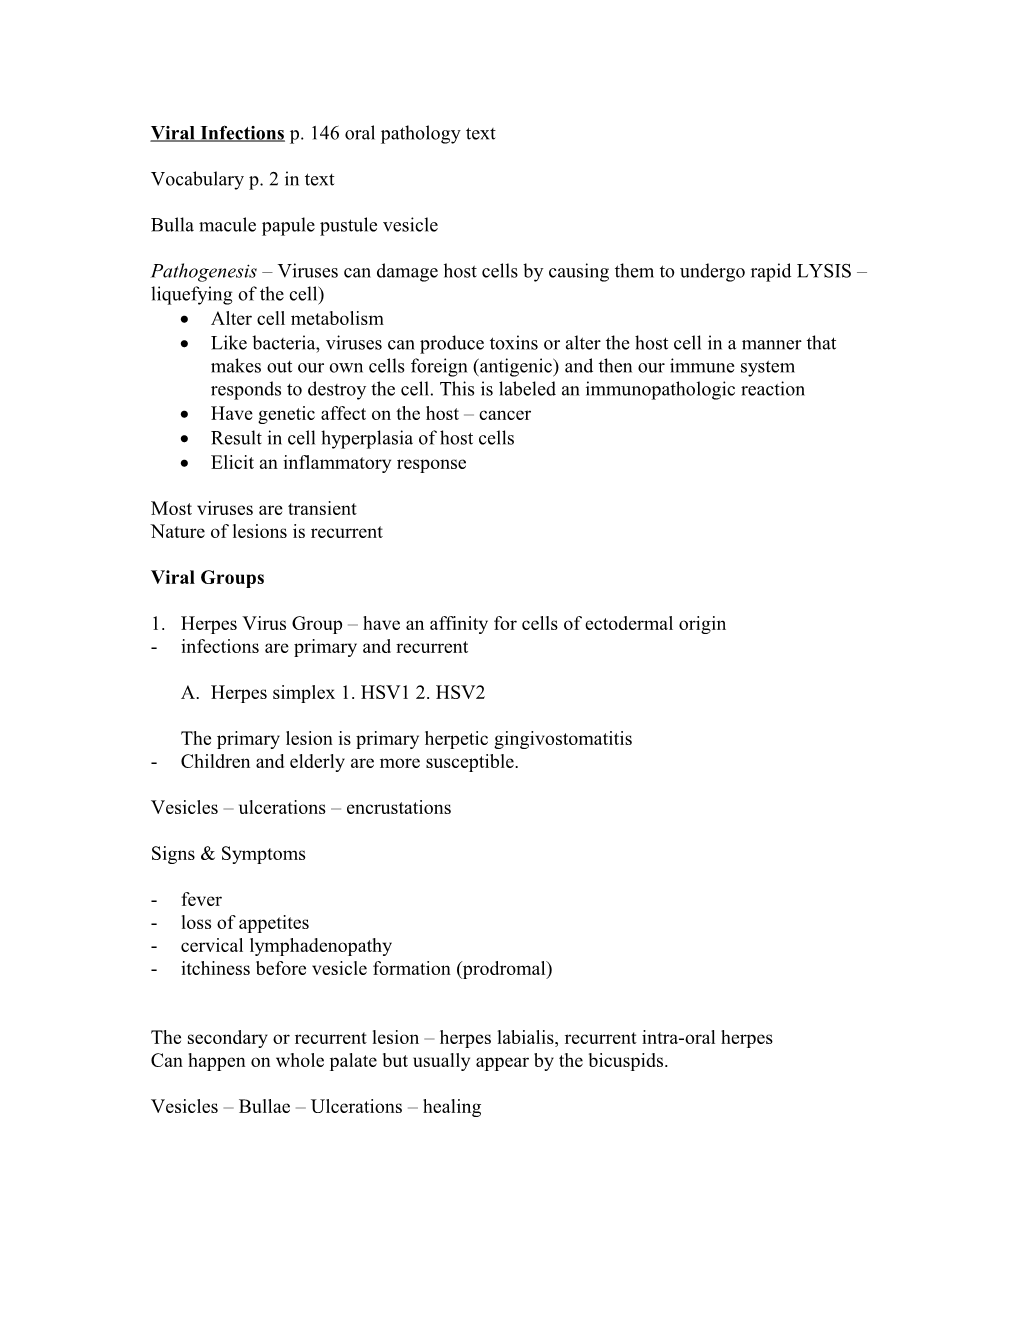 Viral Infections P. 146 Oral Pathology Text